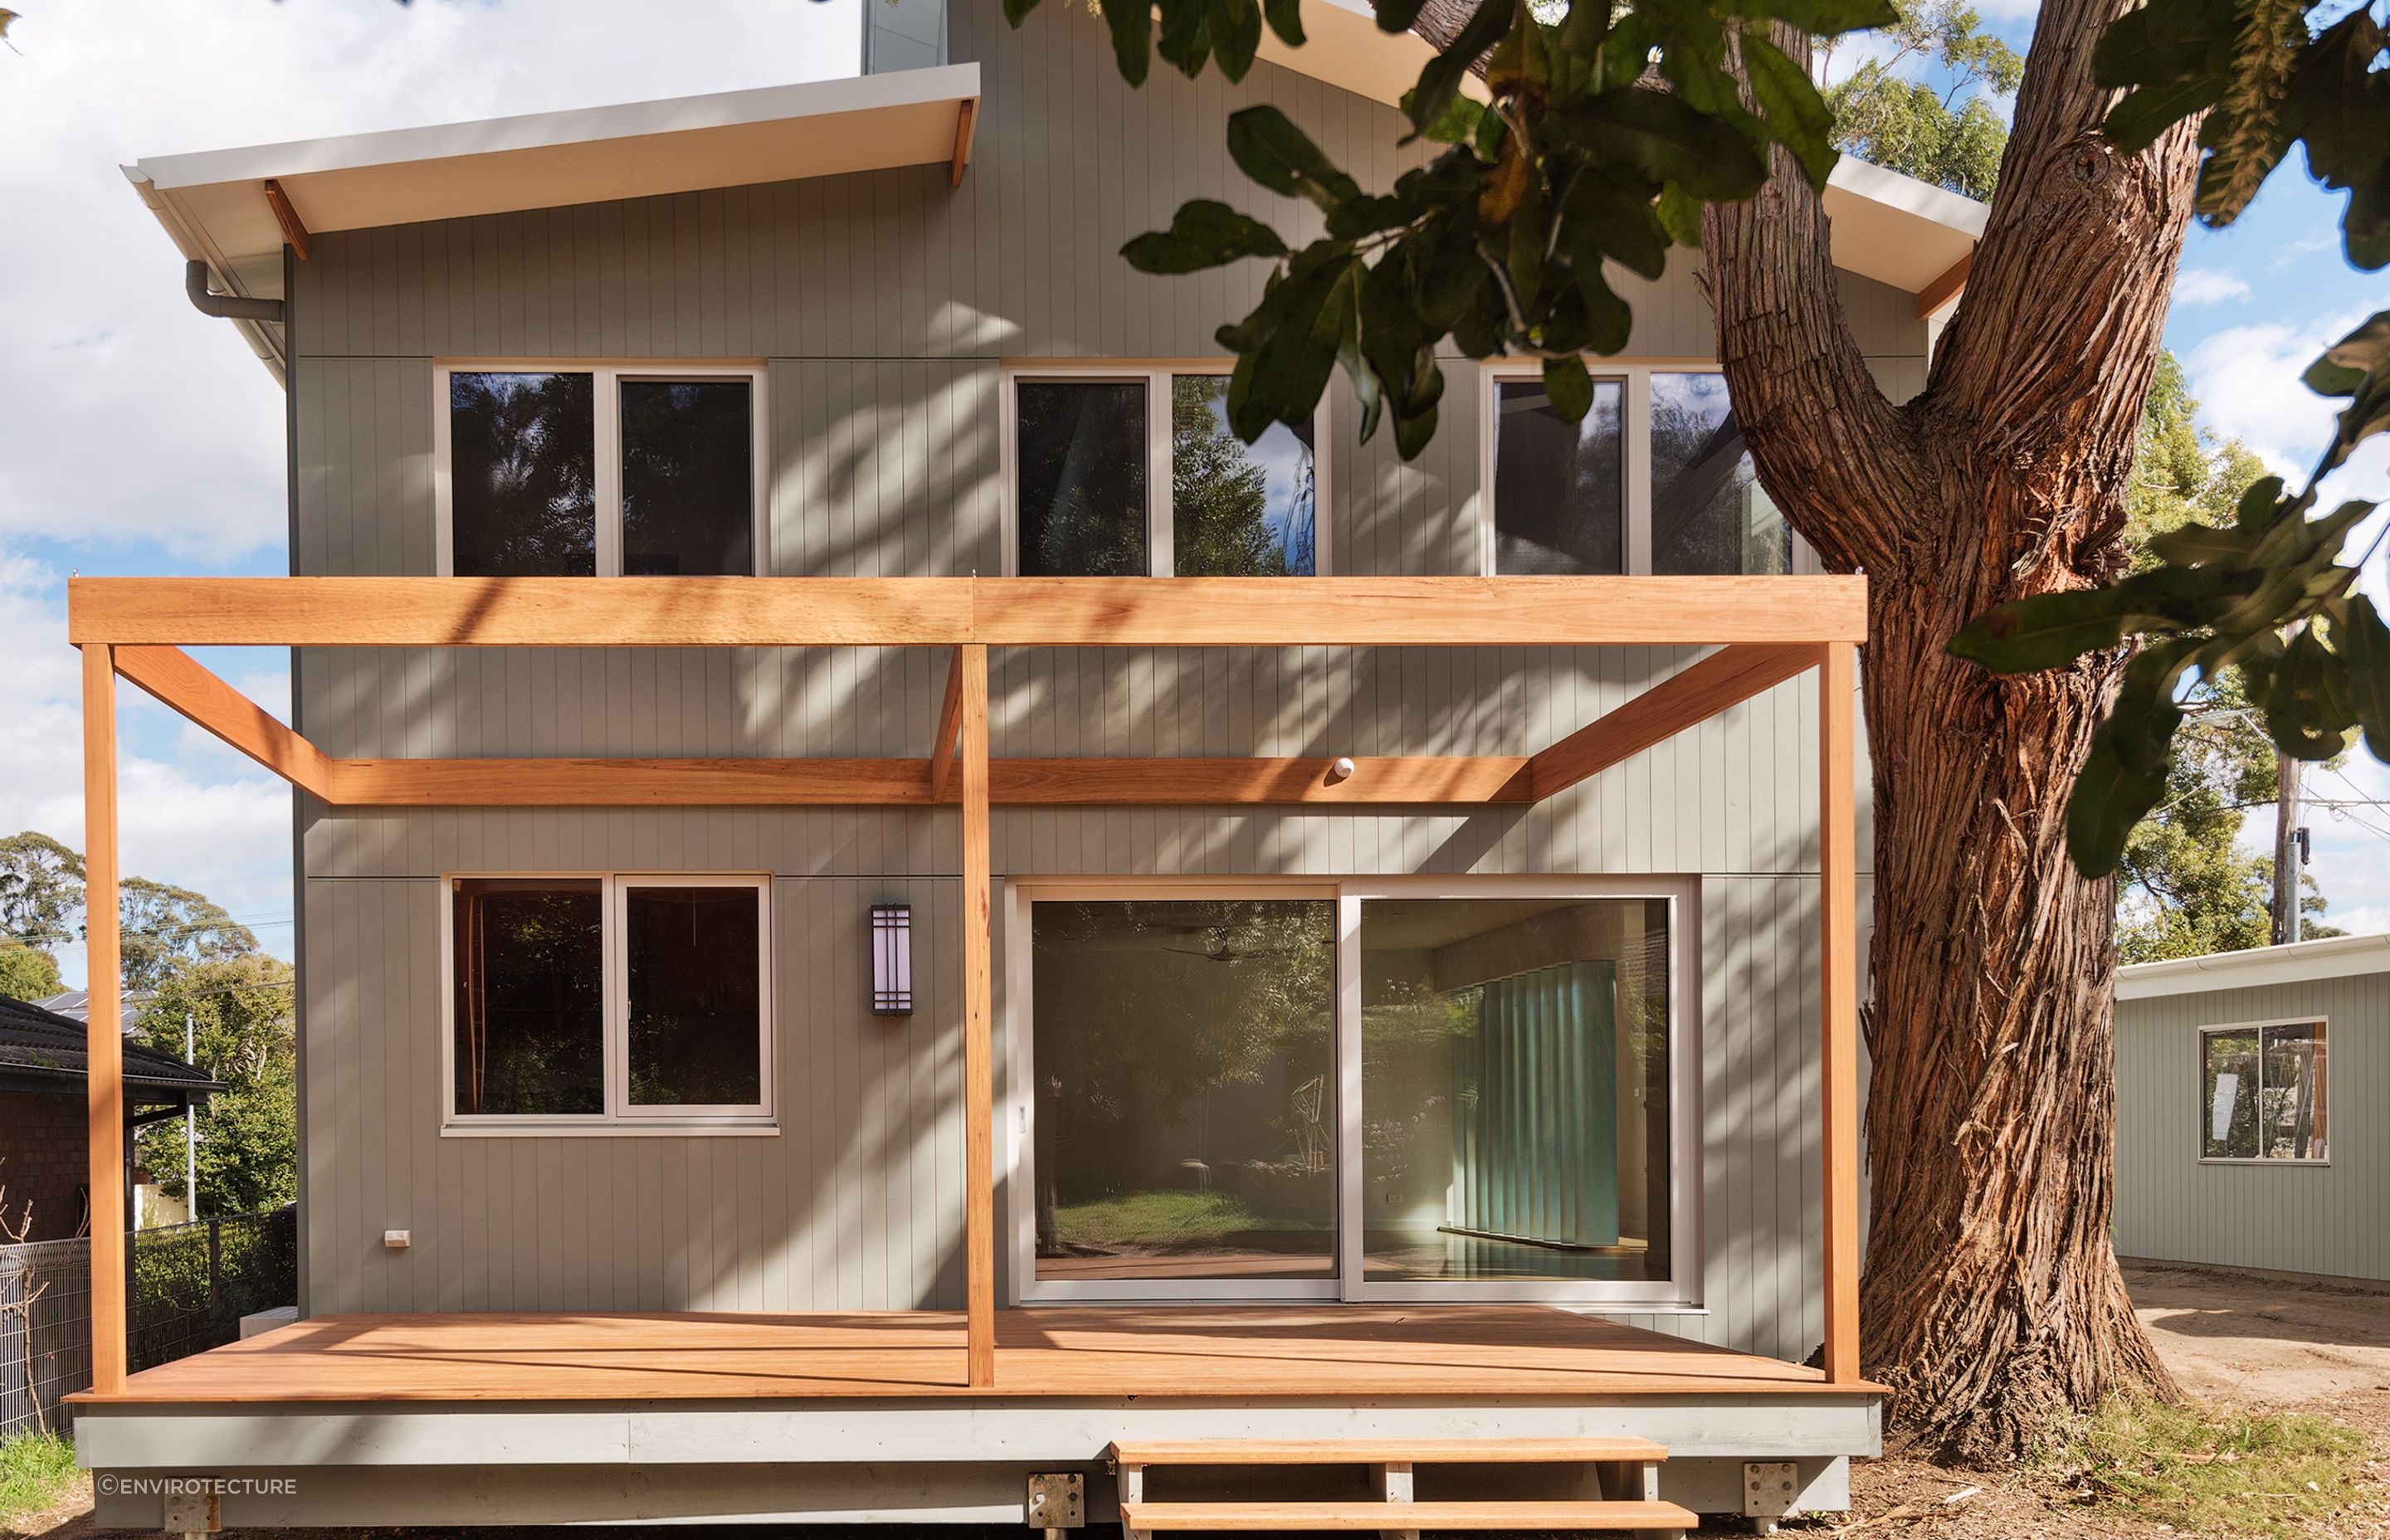 Certified passive houses must adhere to specific design principles. Photography: Petri Kurkaa and Brandee Meie